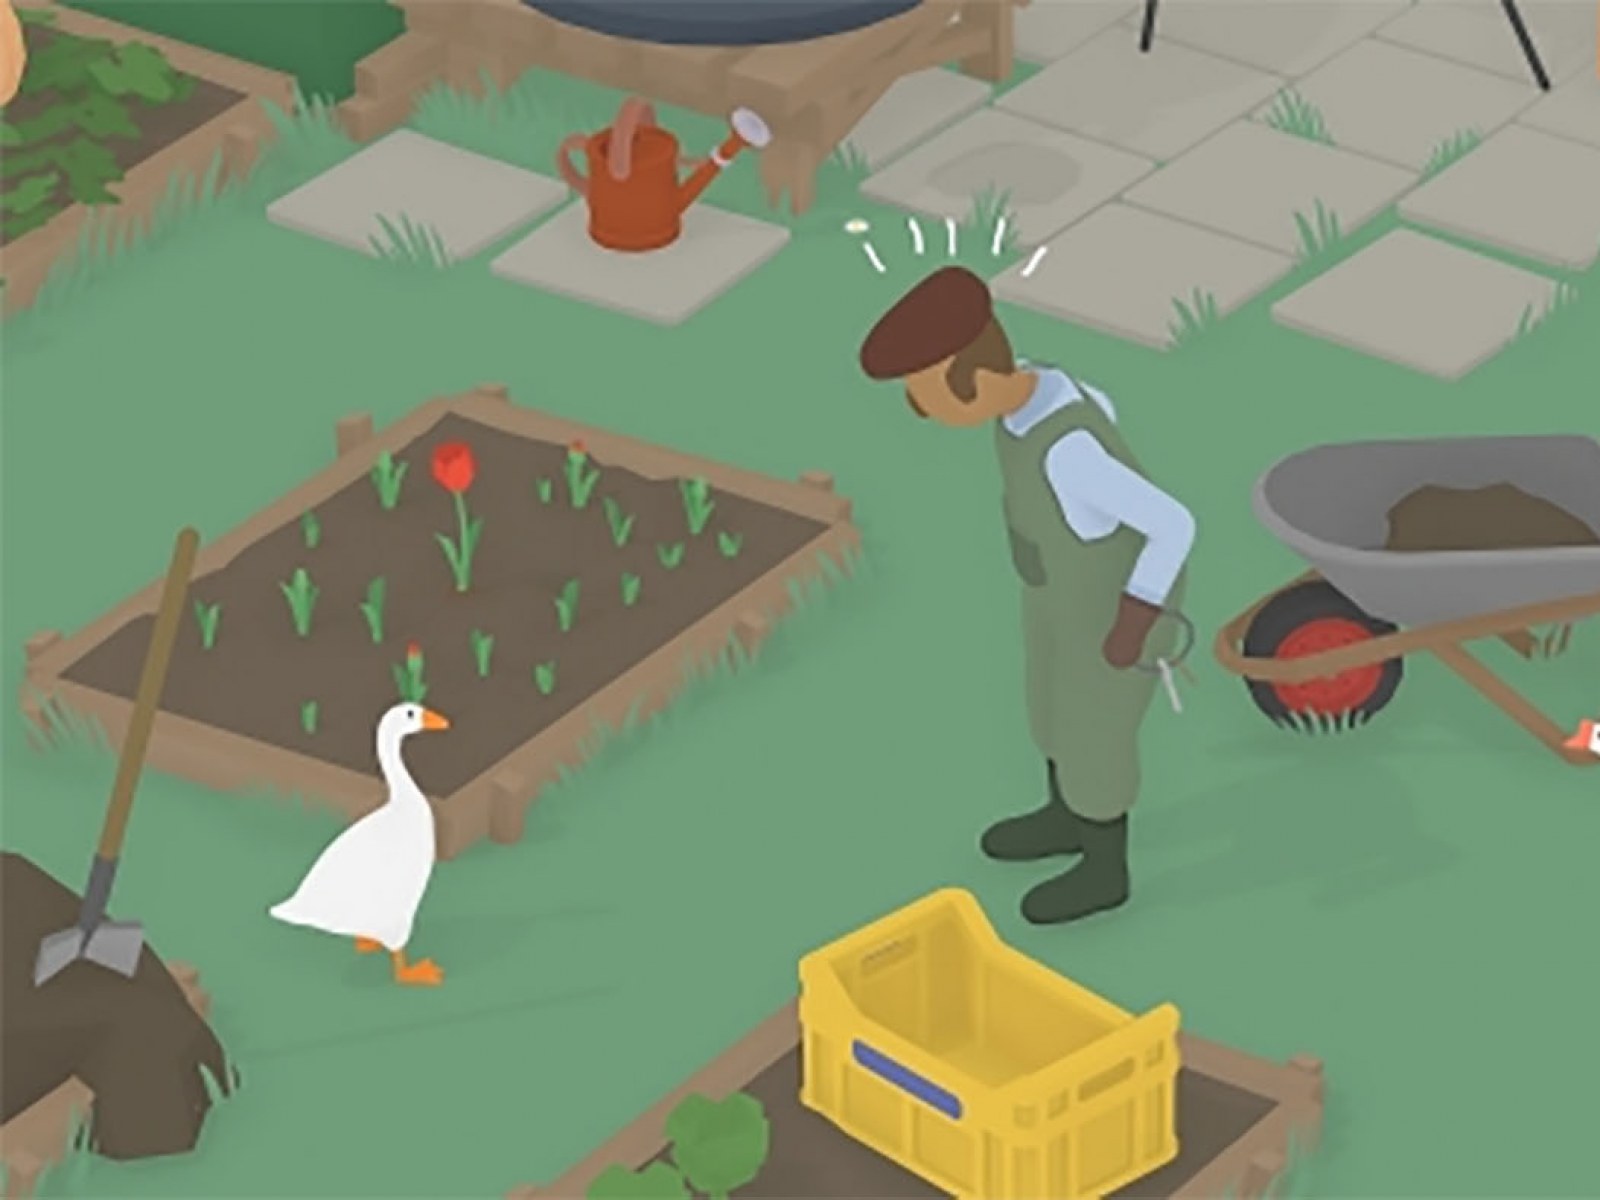 Untitled Goose Game' Update & Every Trailer Shown at Nintendo Direct Indie  World Showcase